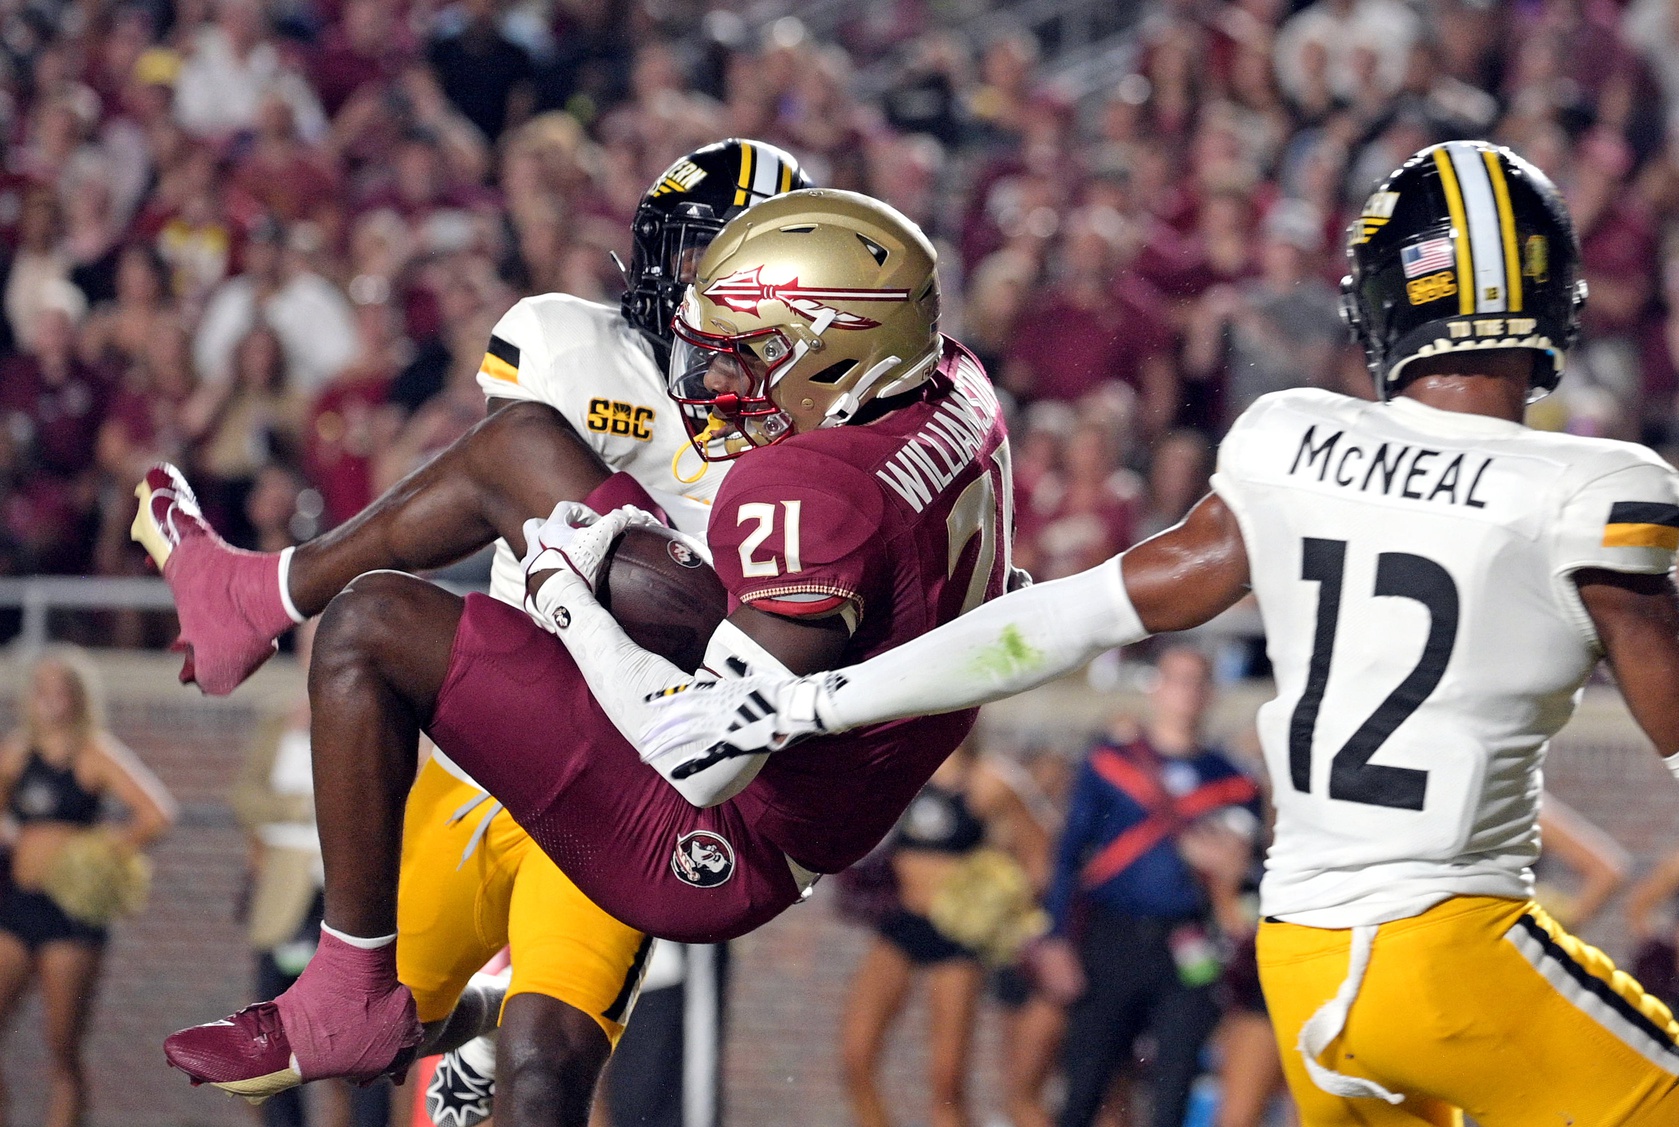 Florida State displayed a full offensive arsenal against Southern Miss in an explosive performance Saturday night in Tallahassee.